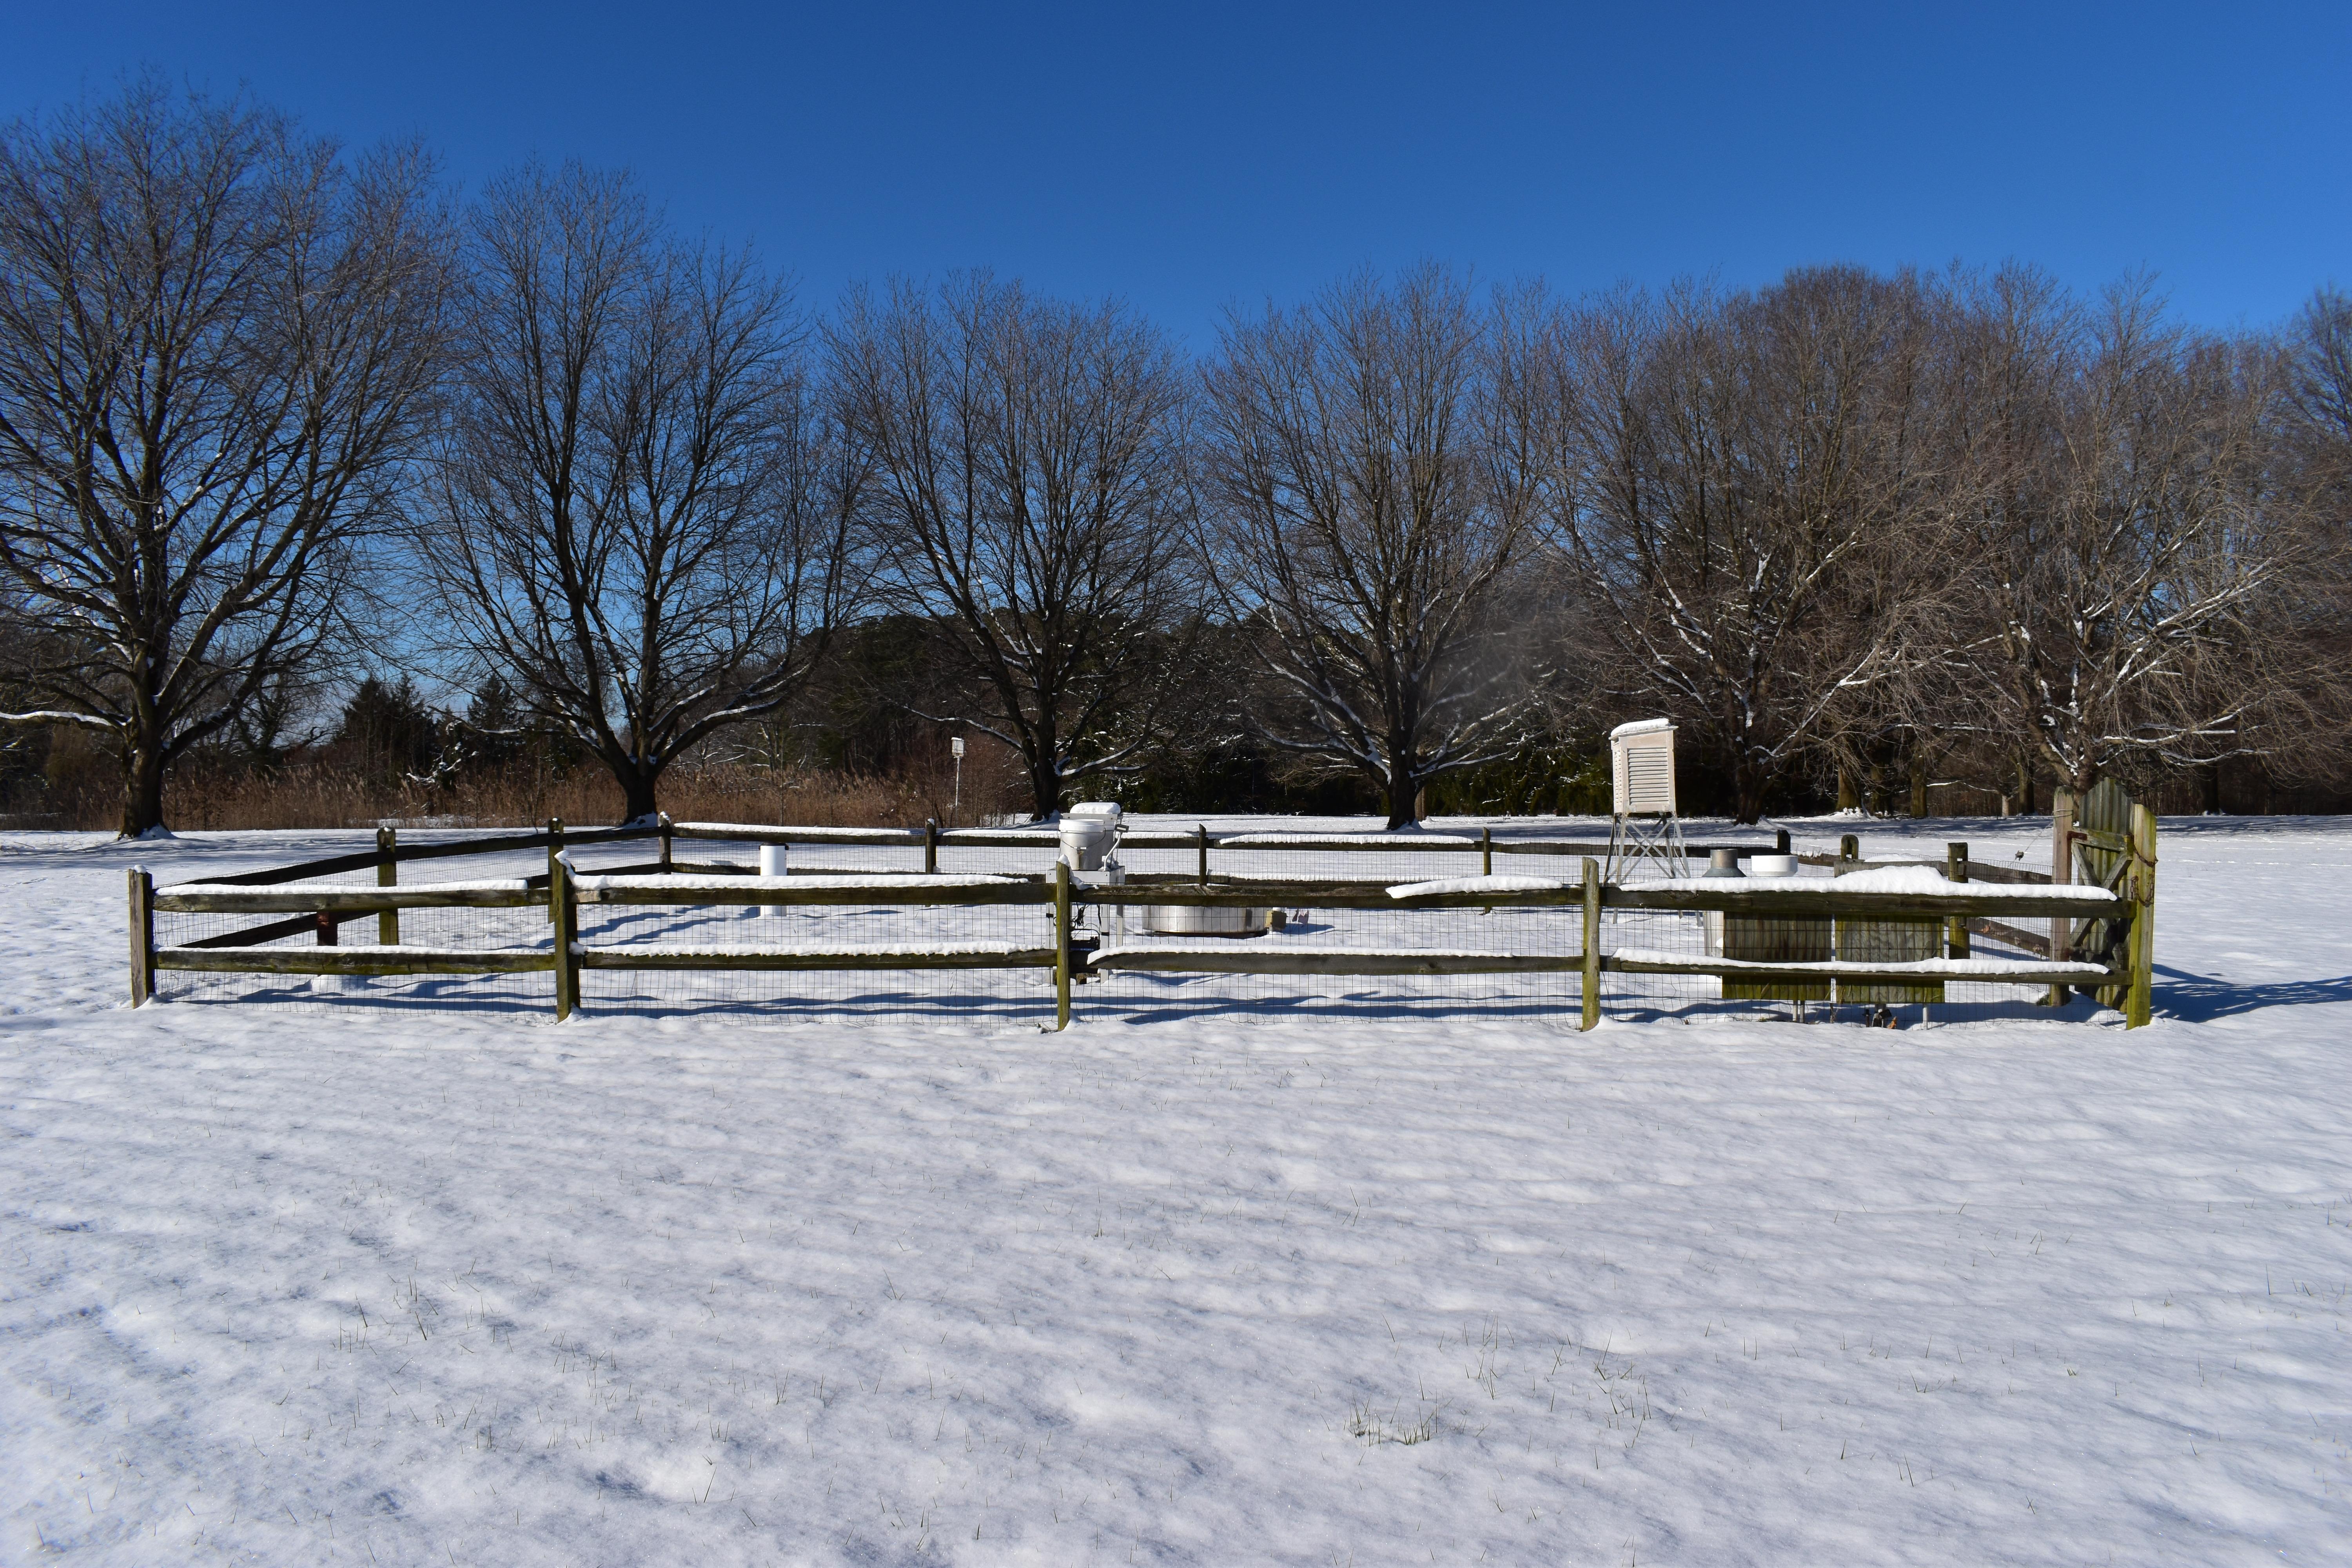 Wye weather station in the snow